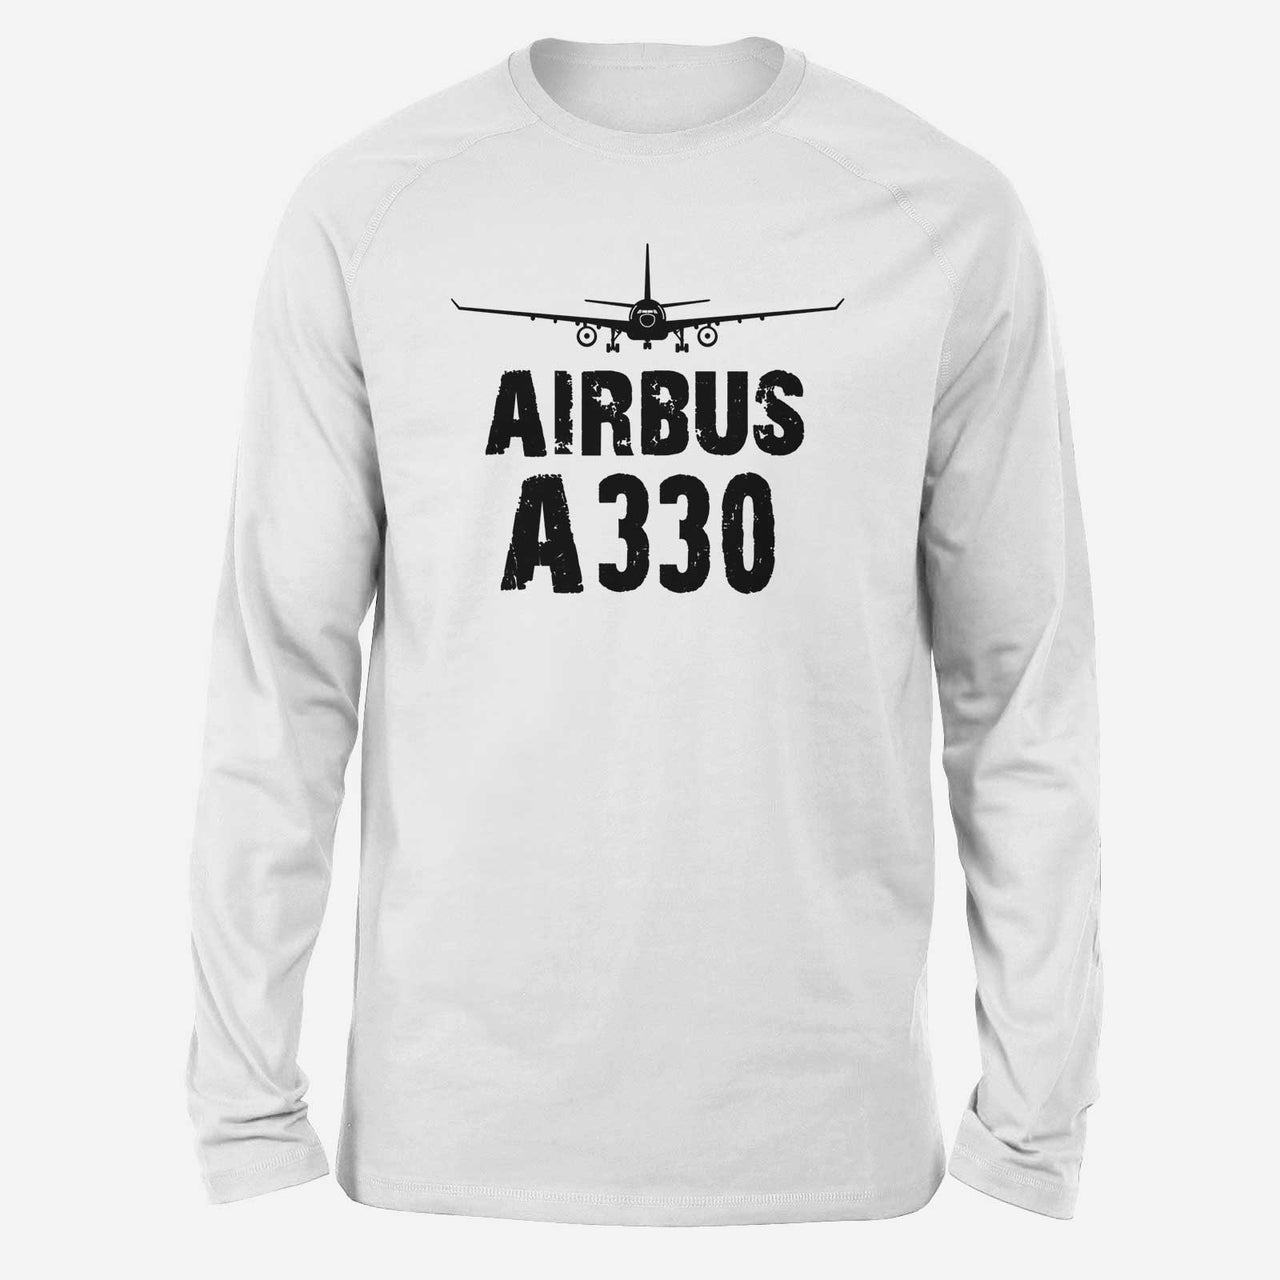 Airbus A330 & Plane Designed Long-Sleeve T-Shirts